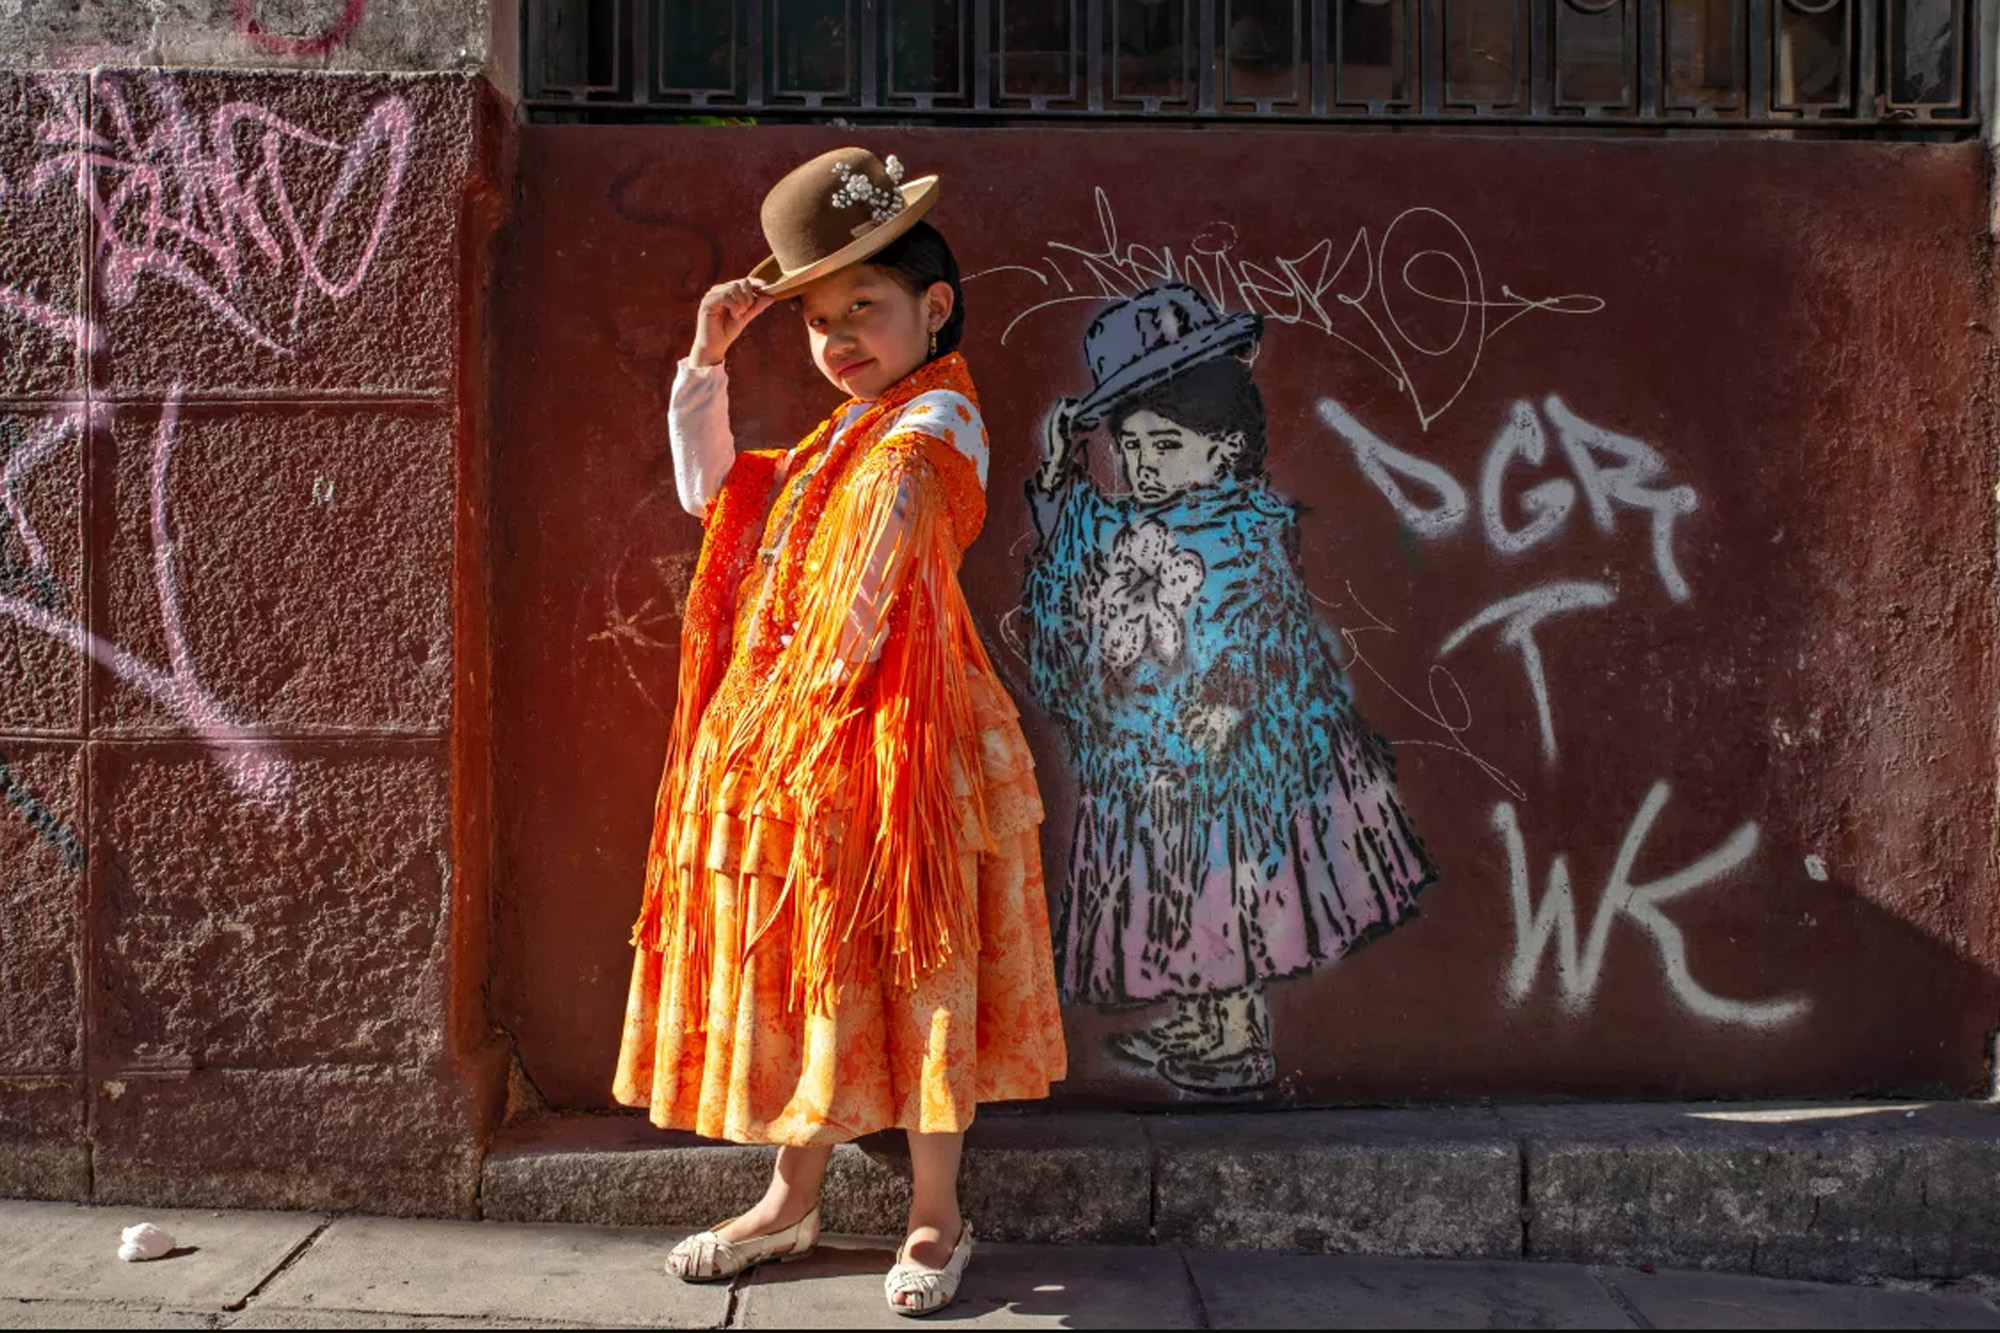 A 7-year-old Peruvian girl poses next to graffiti inspired by a photograph of her taken when she was 2 years old.